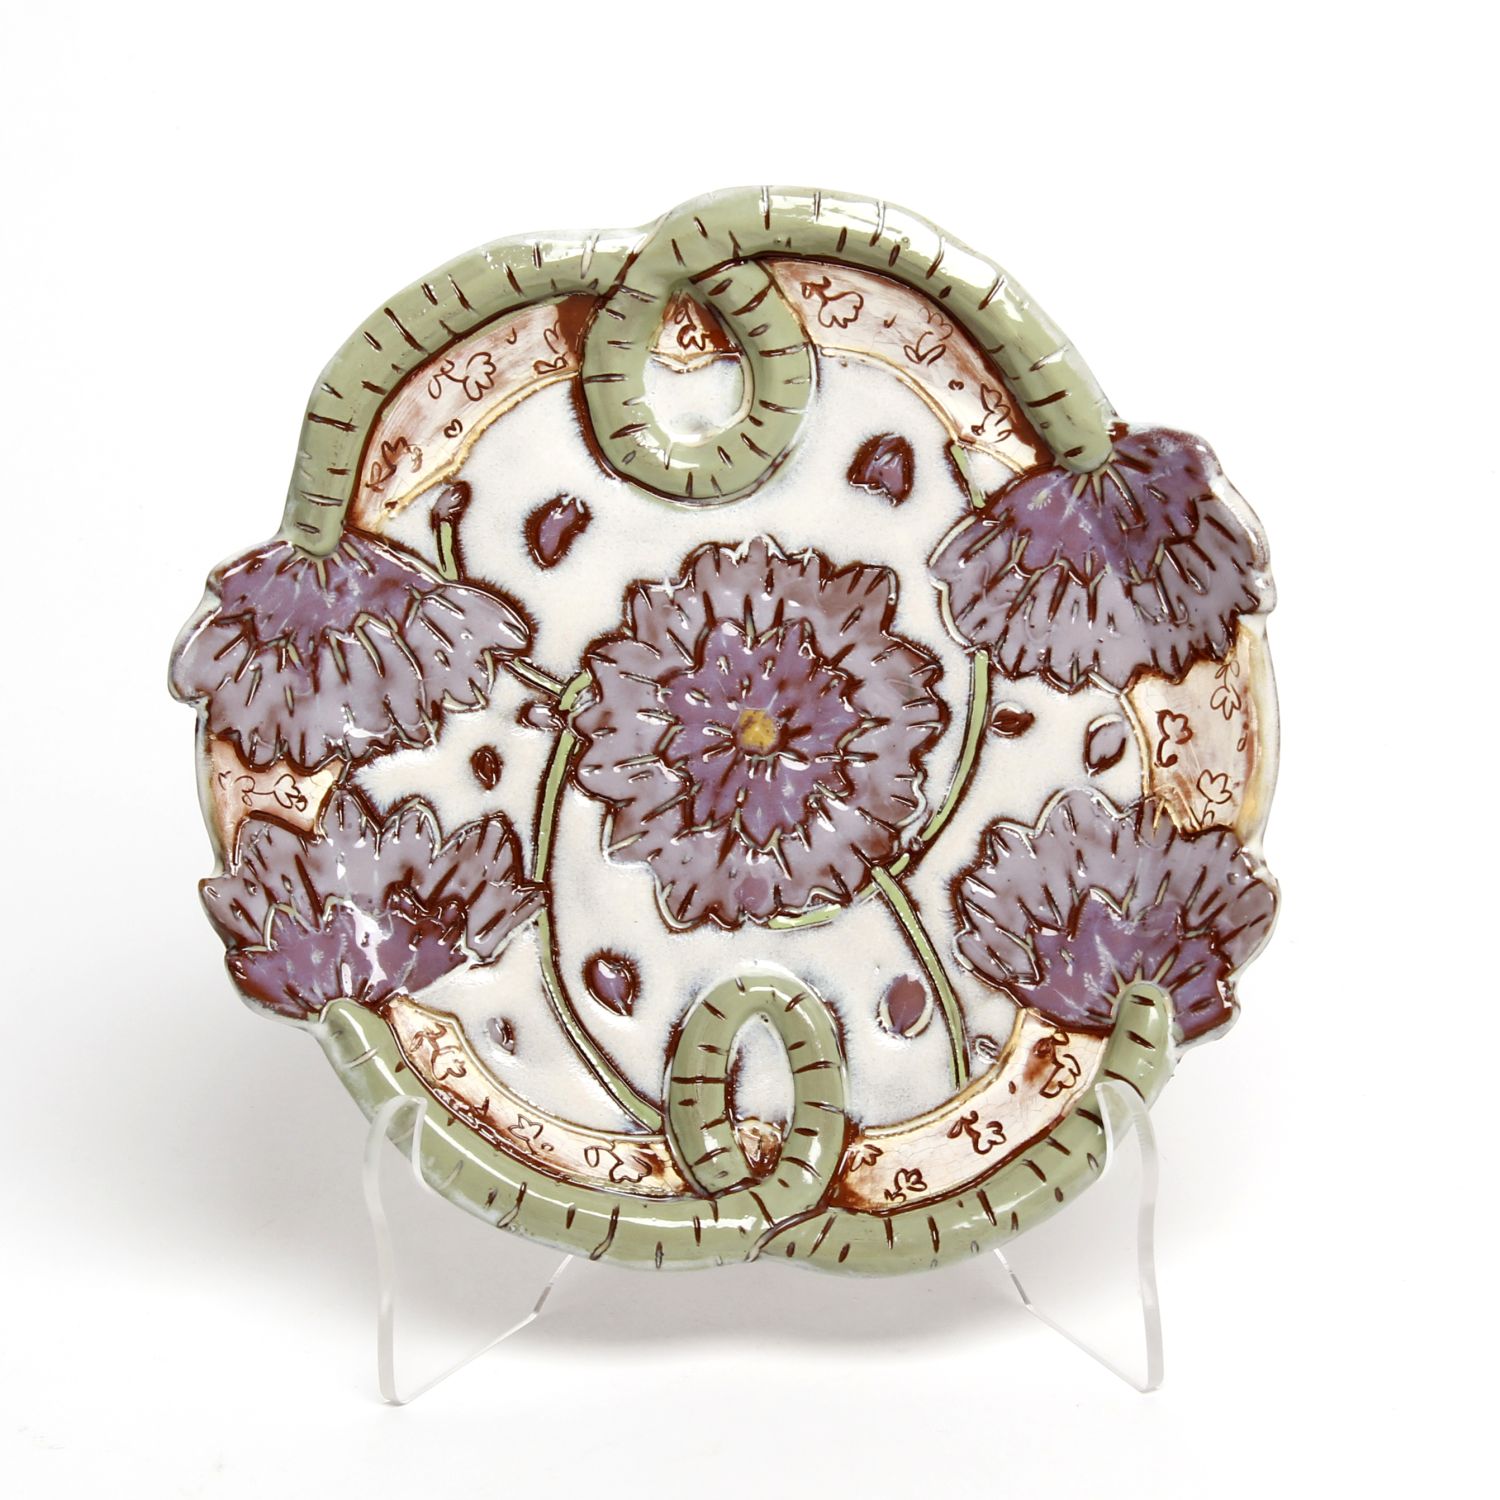 Zoe Pinnell: Purple Flower Plate Product Image 1 of 3